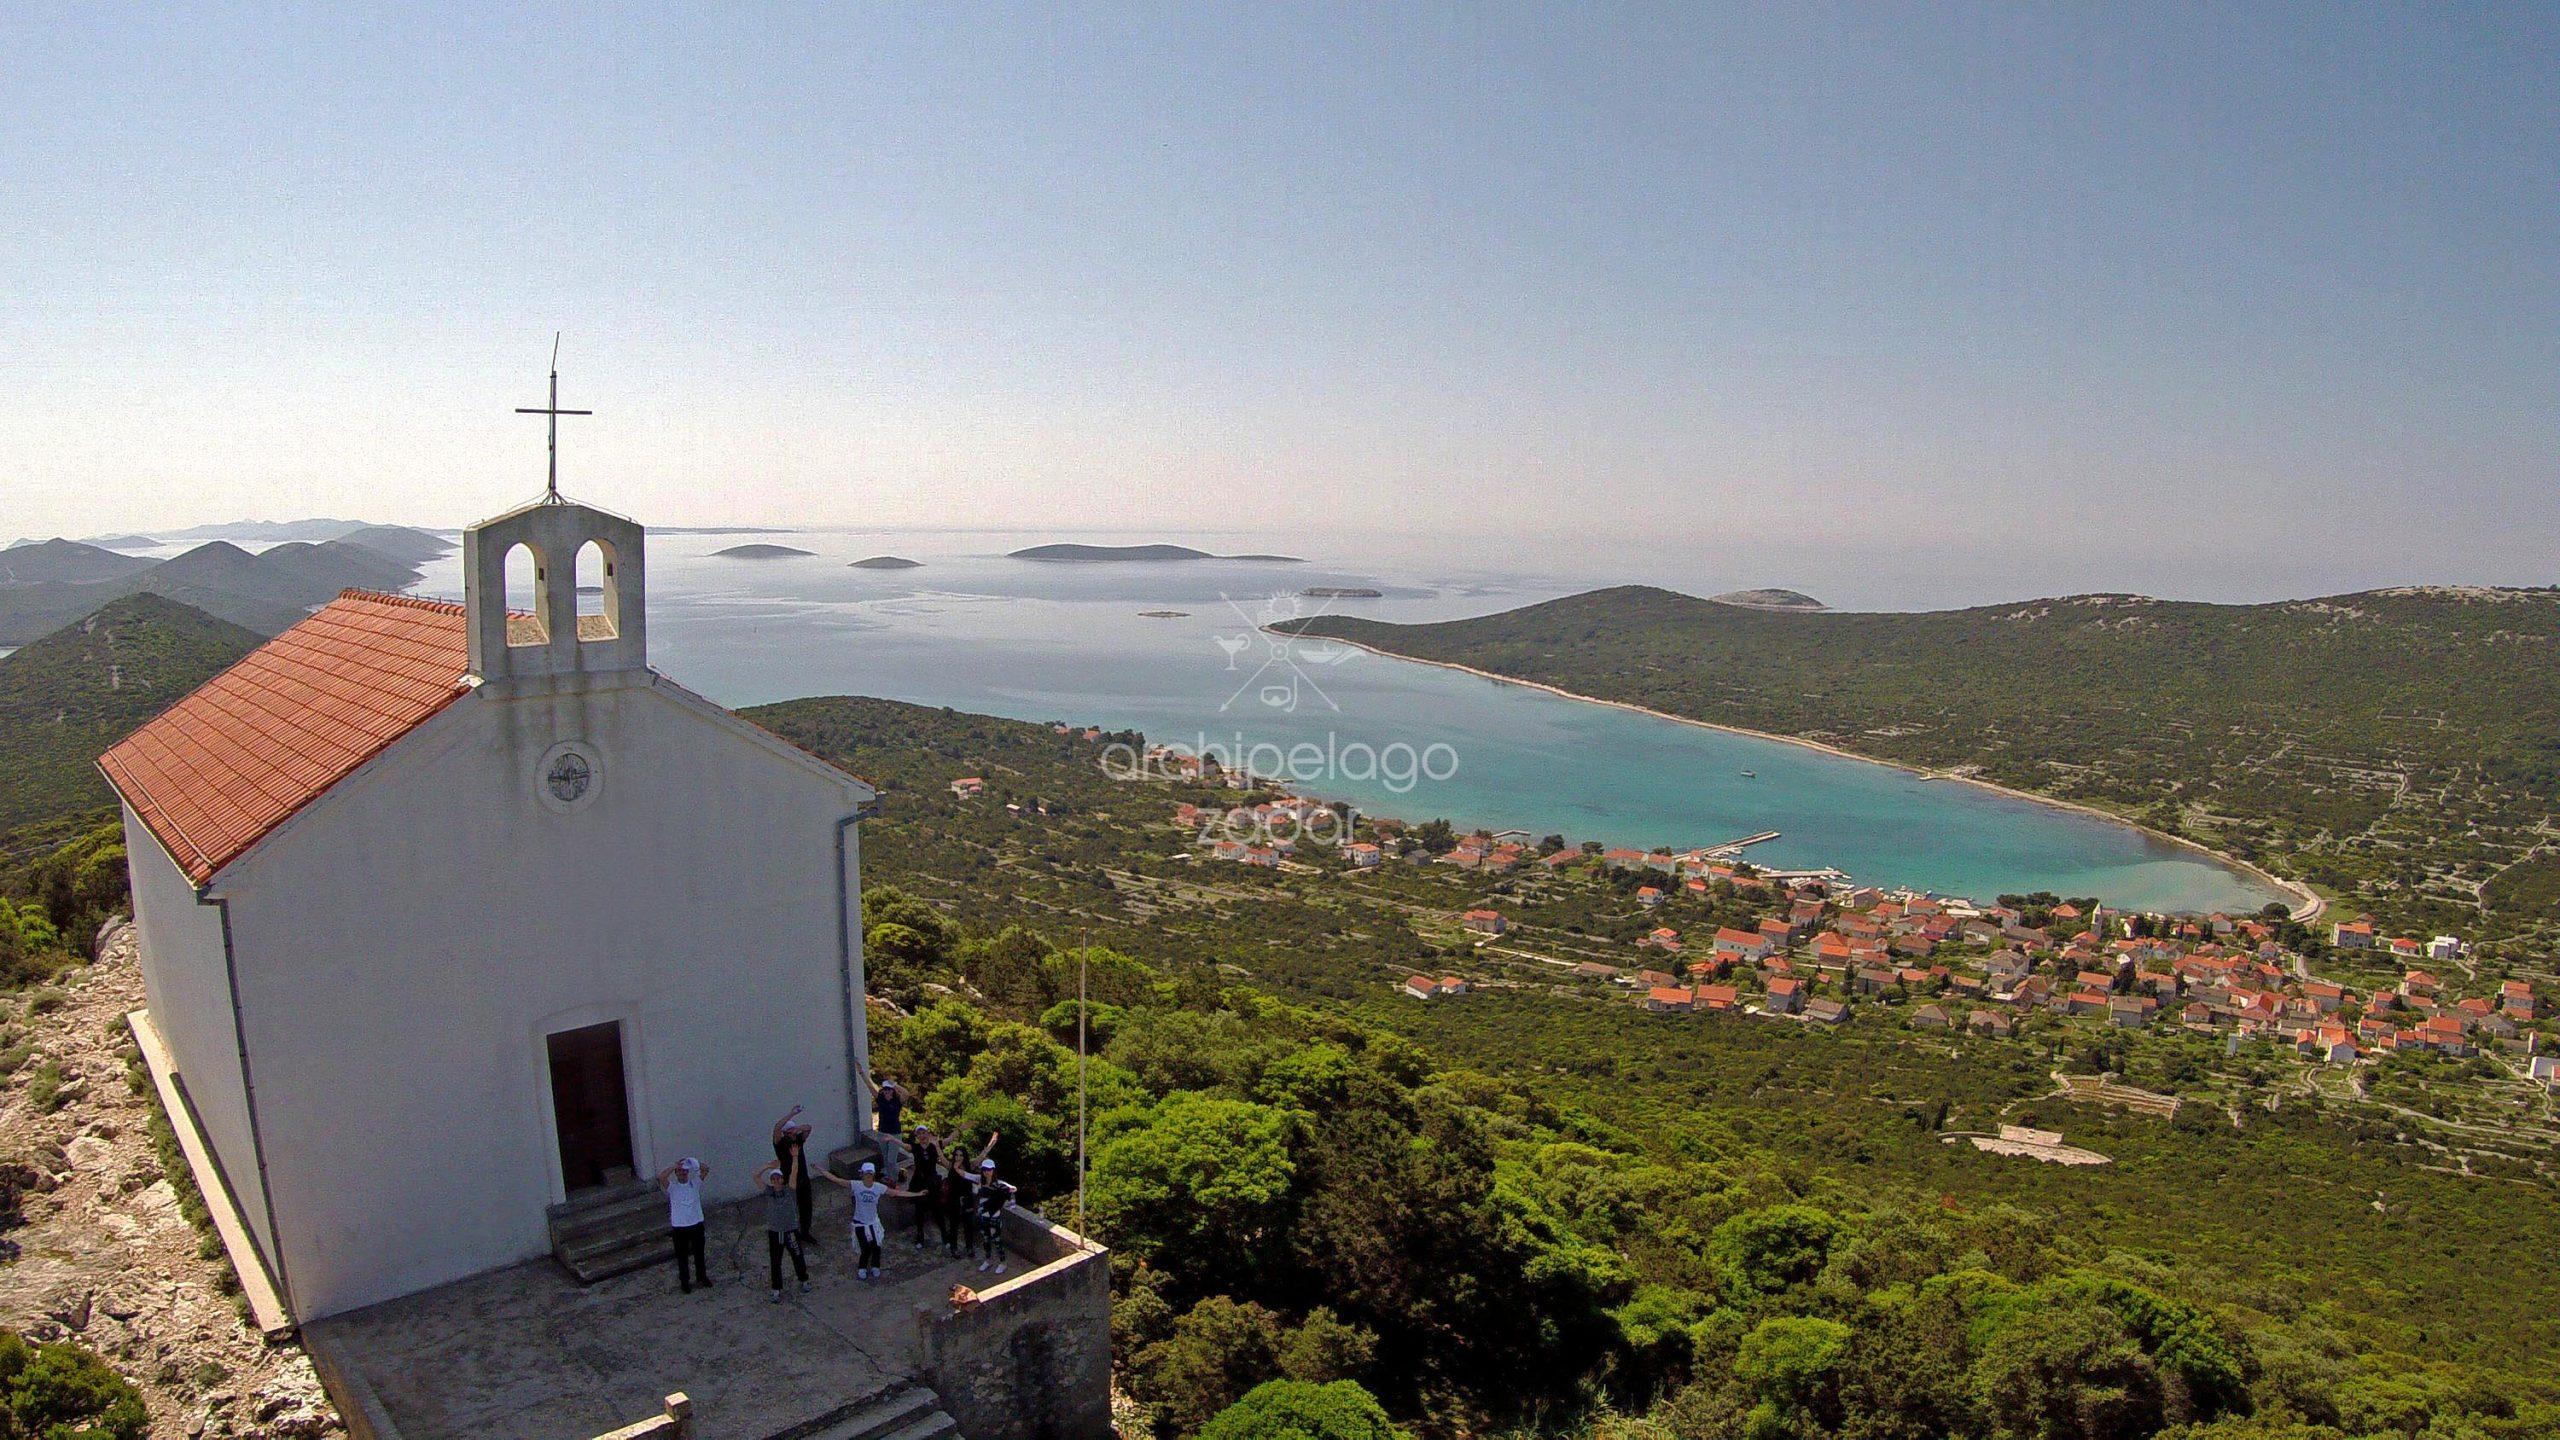 Ist panorama with a church in the foreground